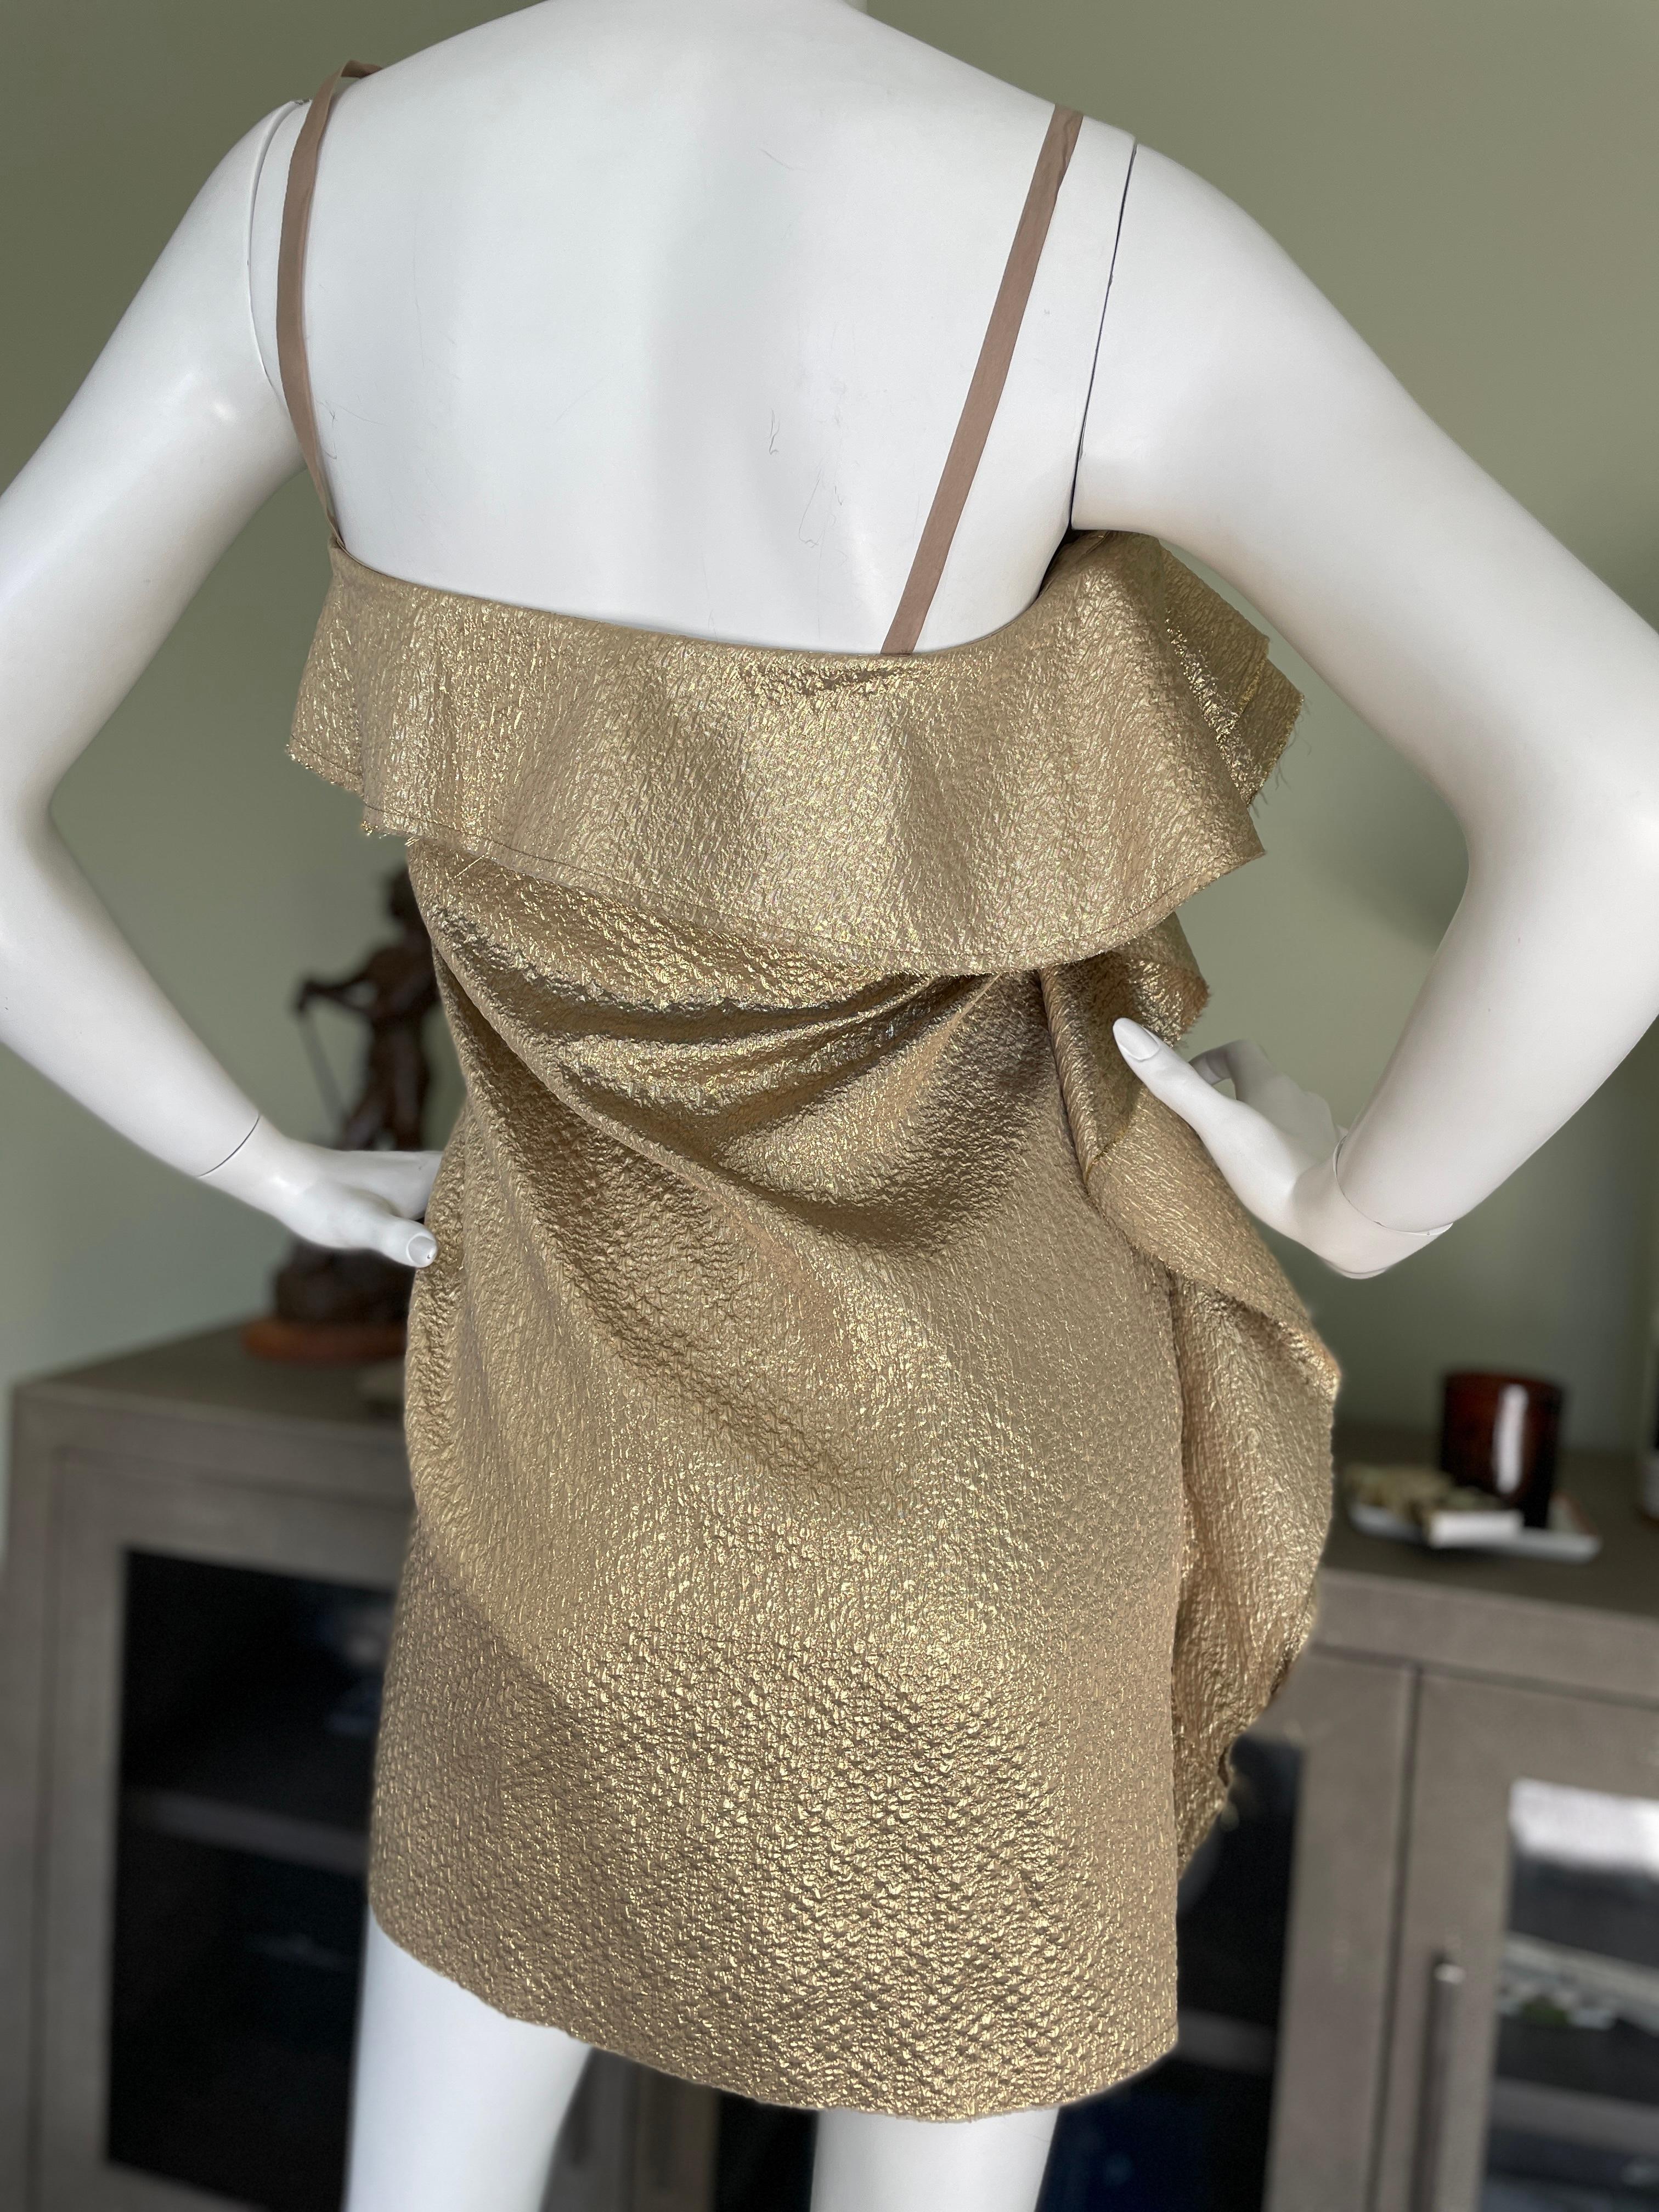 Lanvin by Alber Elbaz Ruffled Gold Mini Dress Spring 2011 In Excellent Condition For Sale In Cloverdale, CA